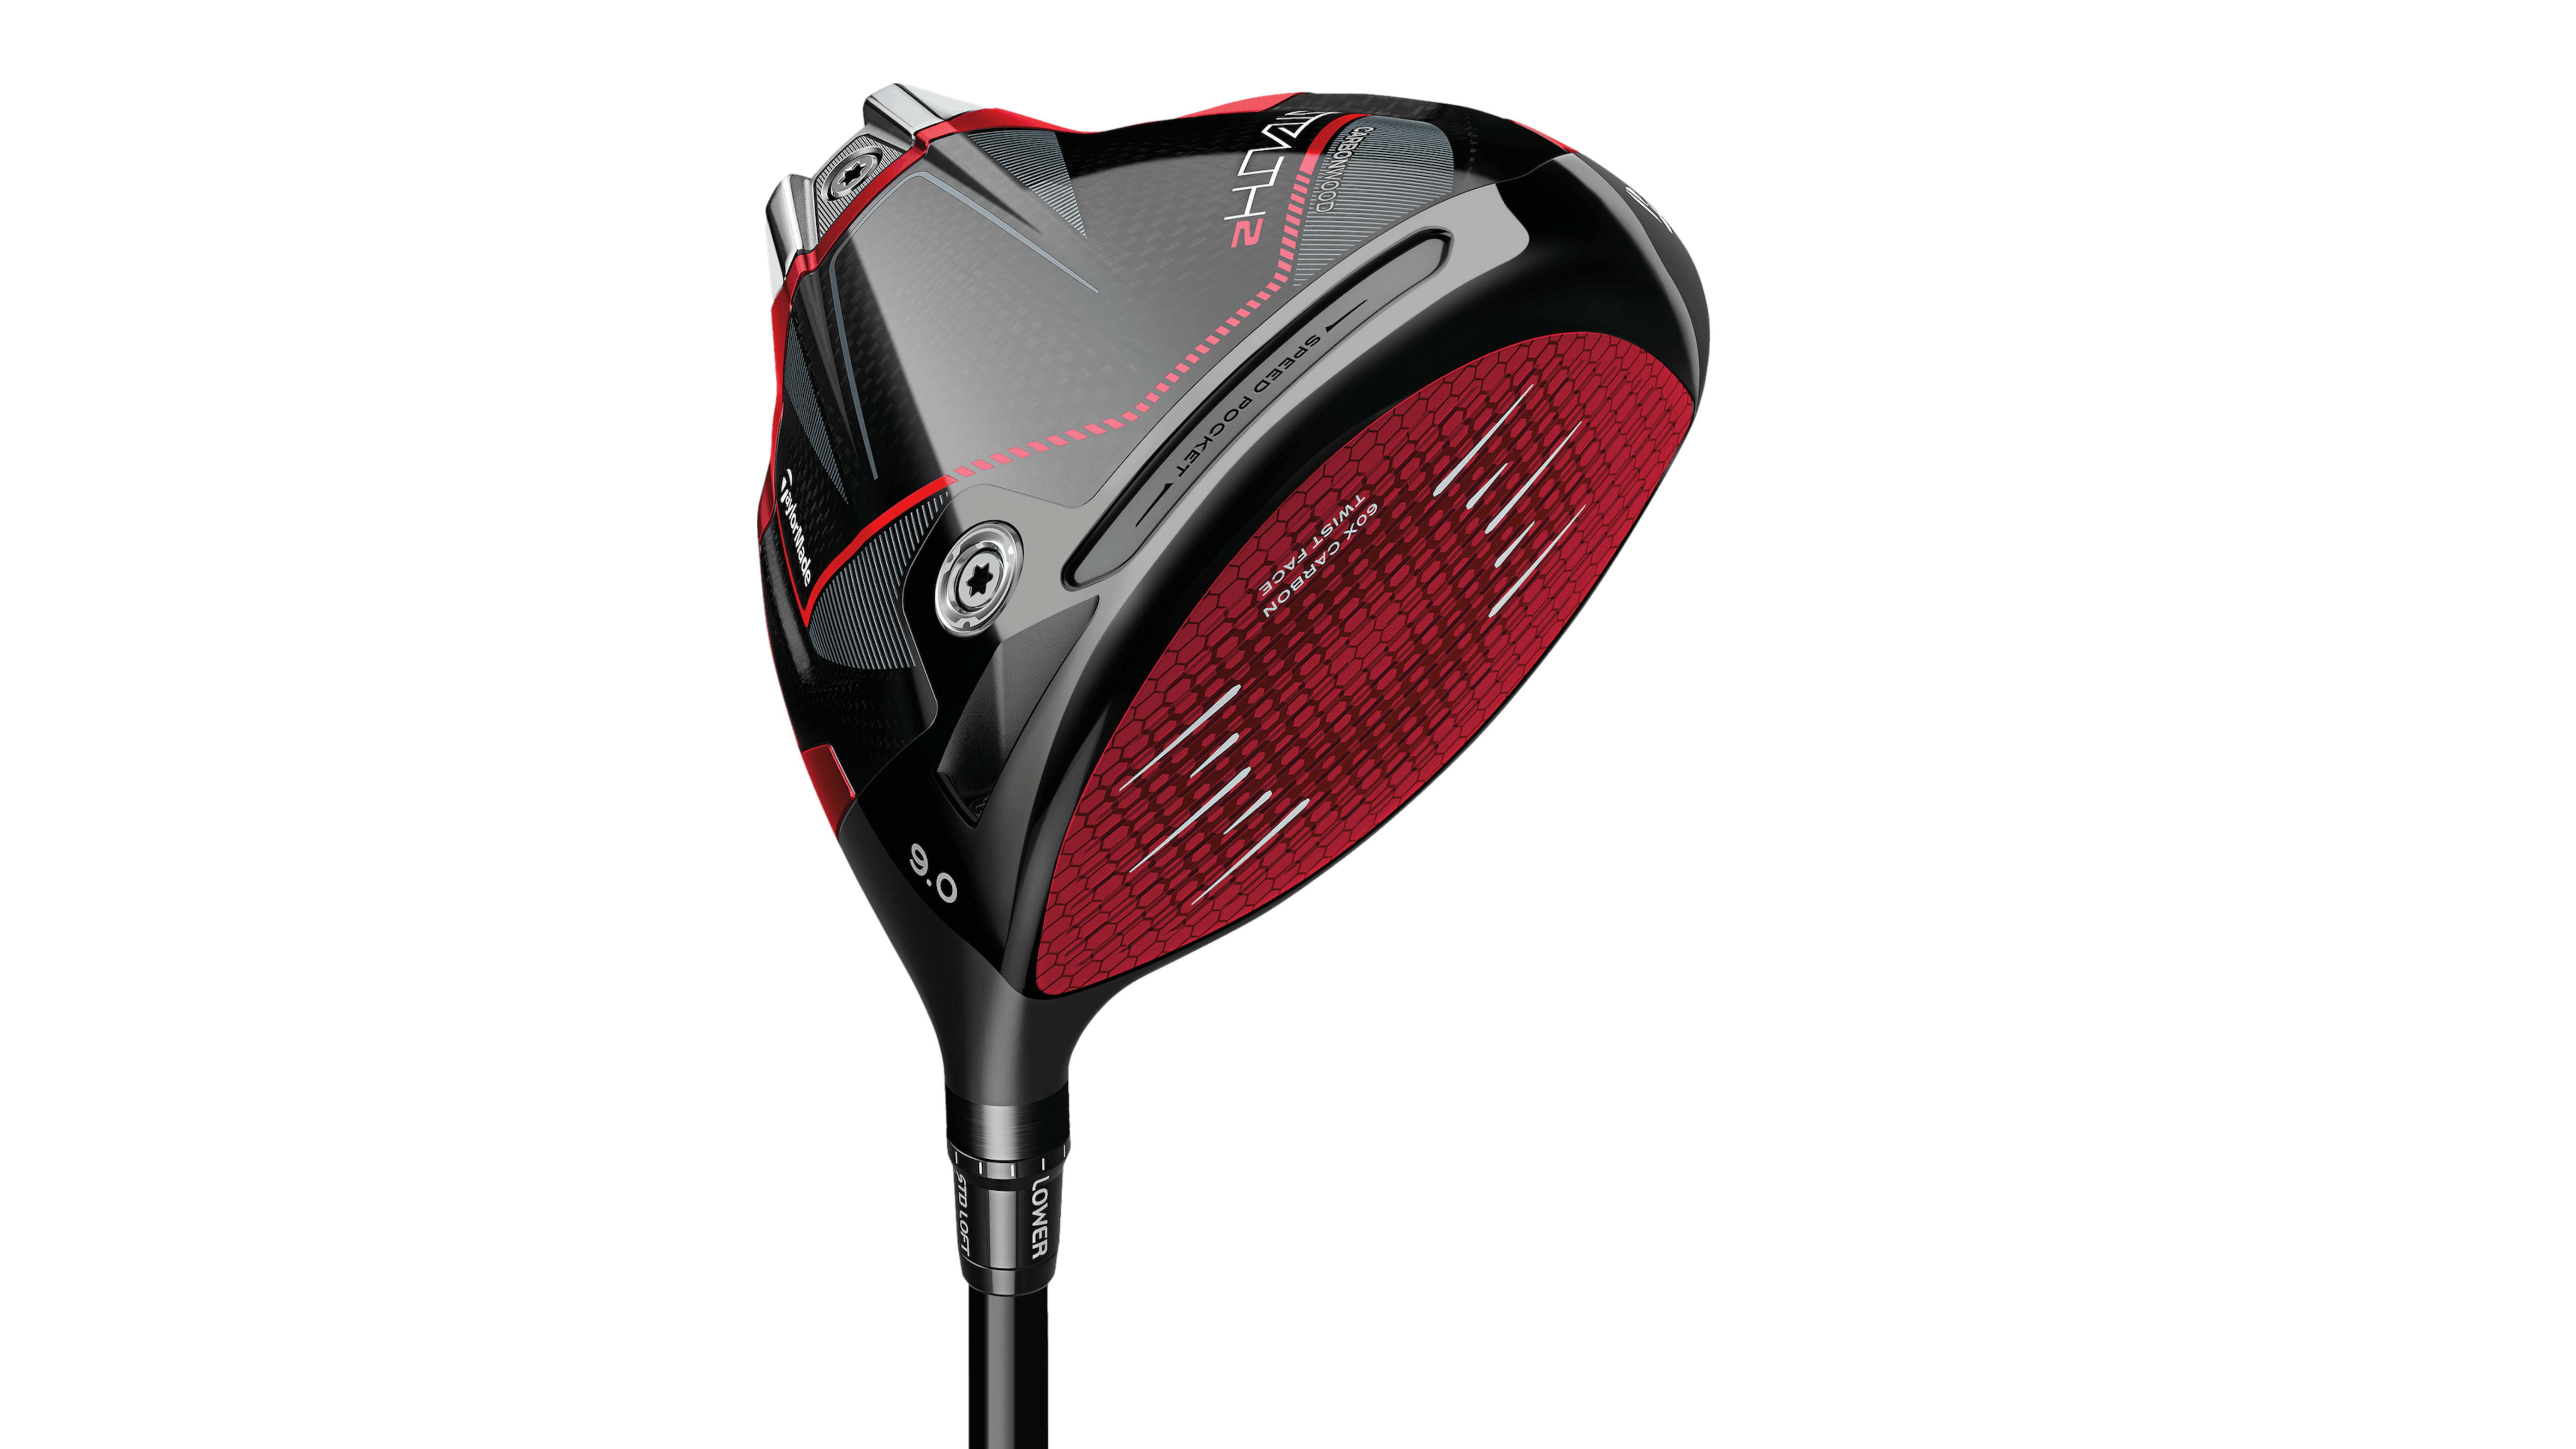 FORE Her - 2023 Holiday Golf Gift Guide